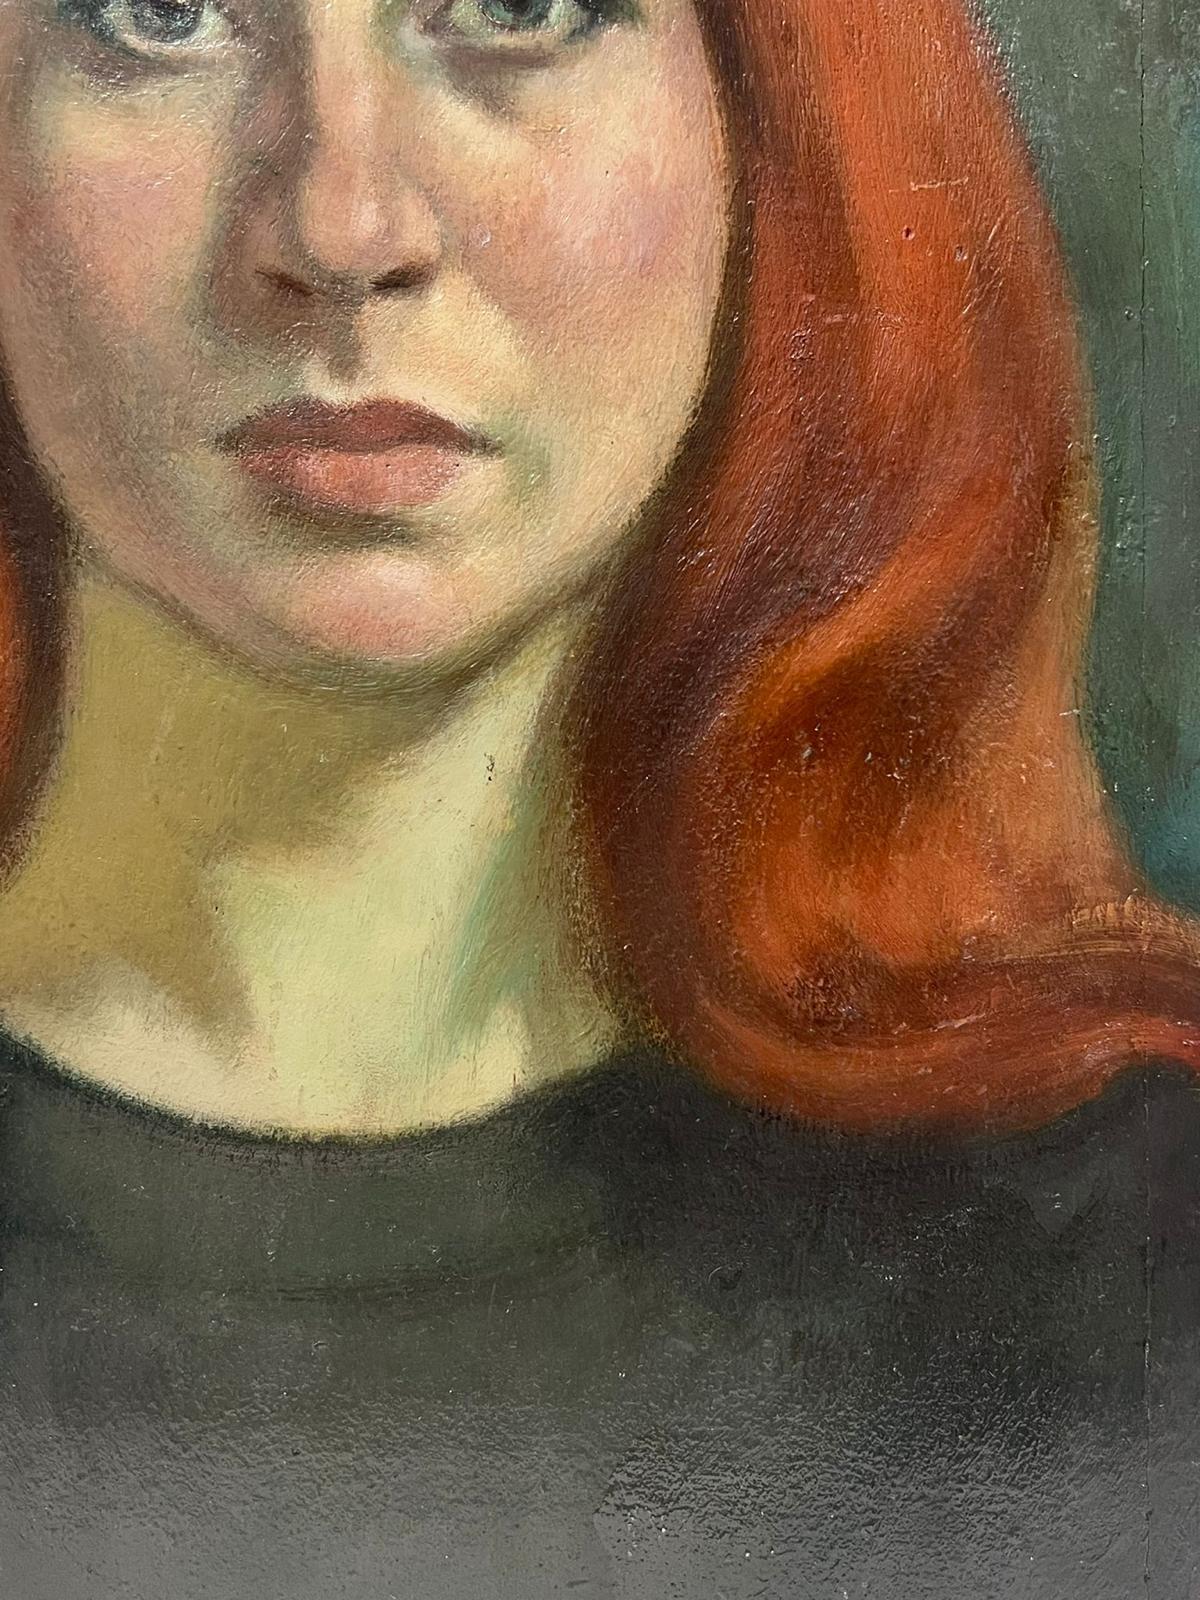 The Auburn Haired lady
by Jacob Markiel (Polish 1911-2008) *See notes signed below oil on board, unframed
board: 20 x 12 inches
provenance: the artists estate, south of France
condition: very good and sound condition

Jacob Markiel was born into a